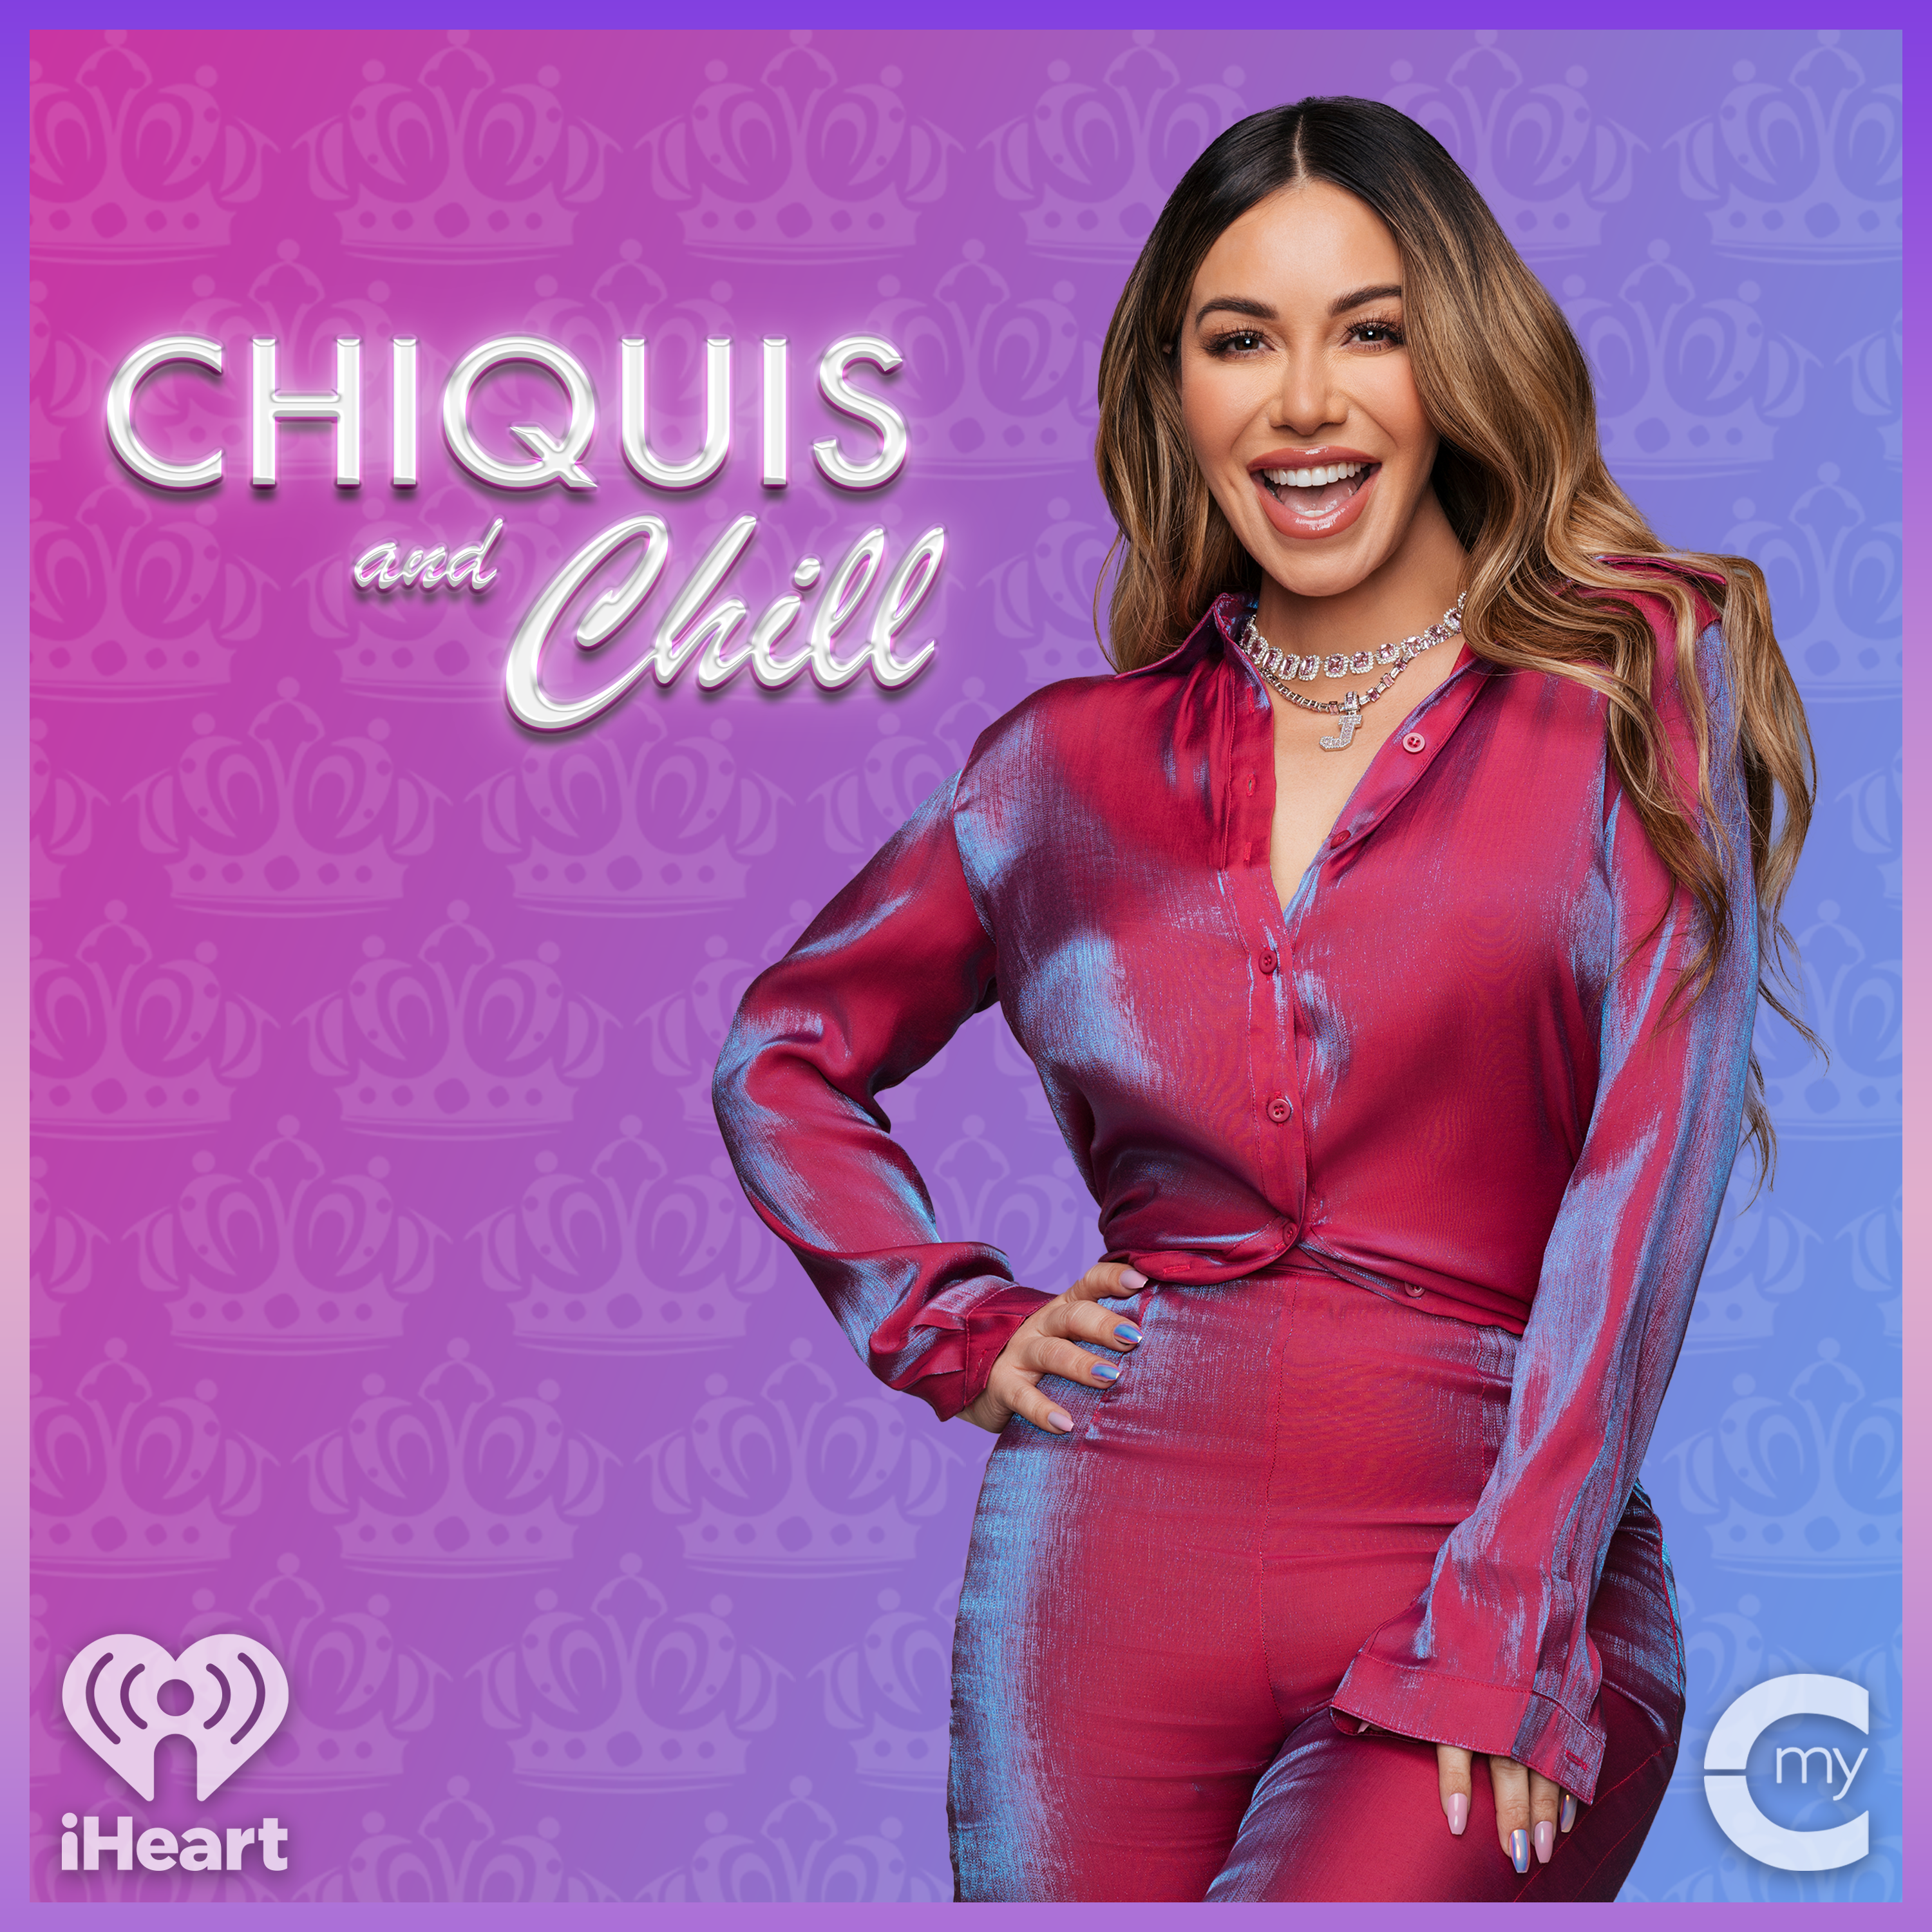 Introducing: Chiquis and Chill